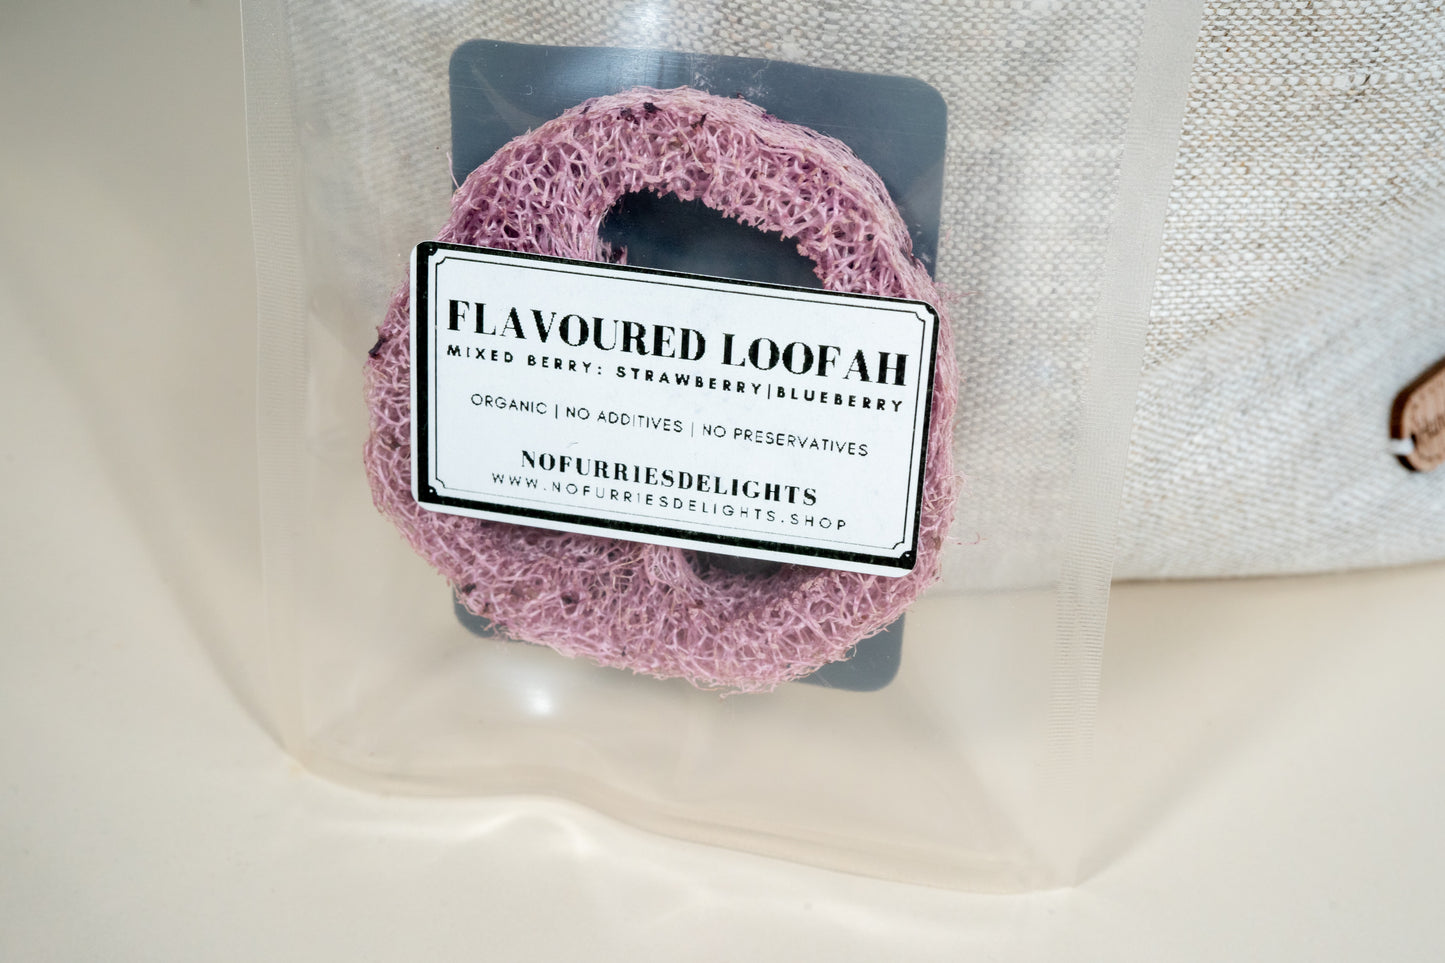 Strawberry and blueberry loofah: organic toy for small pets and birds.